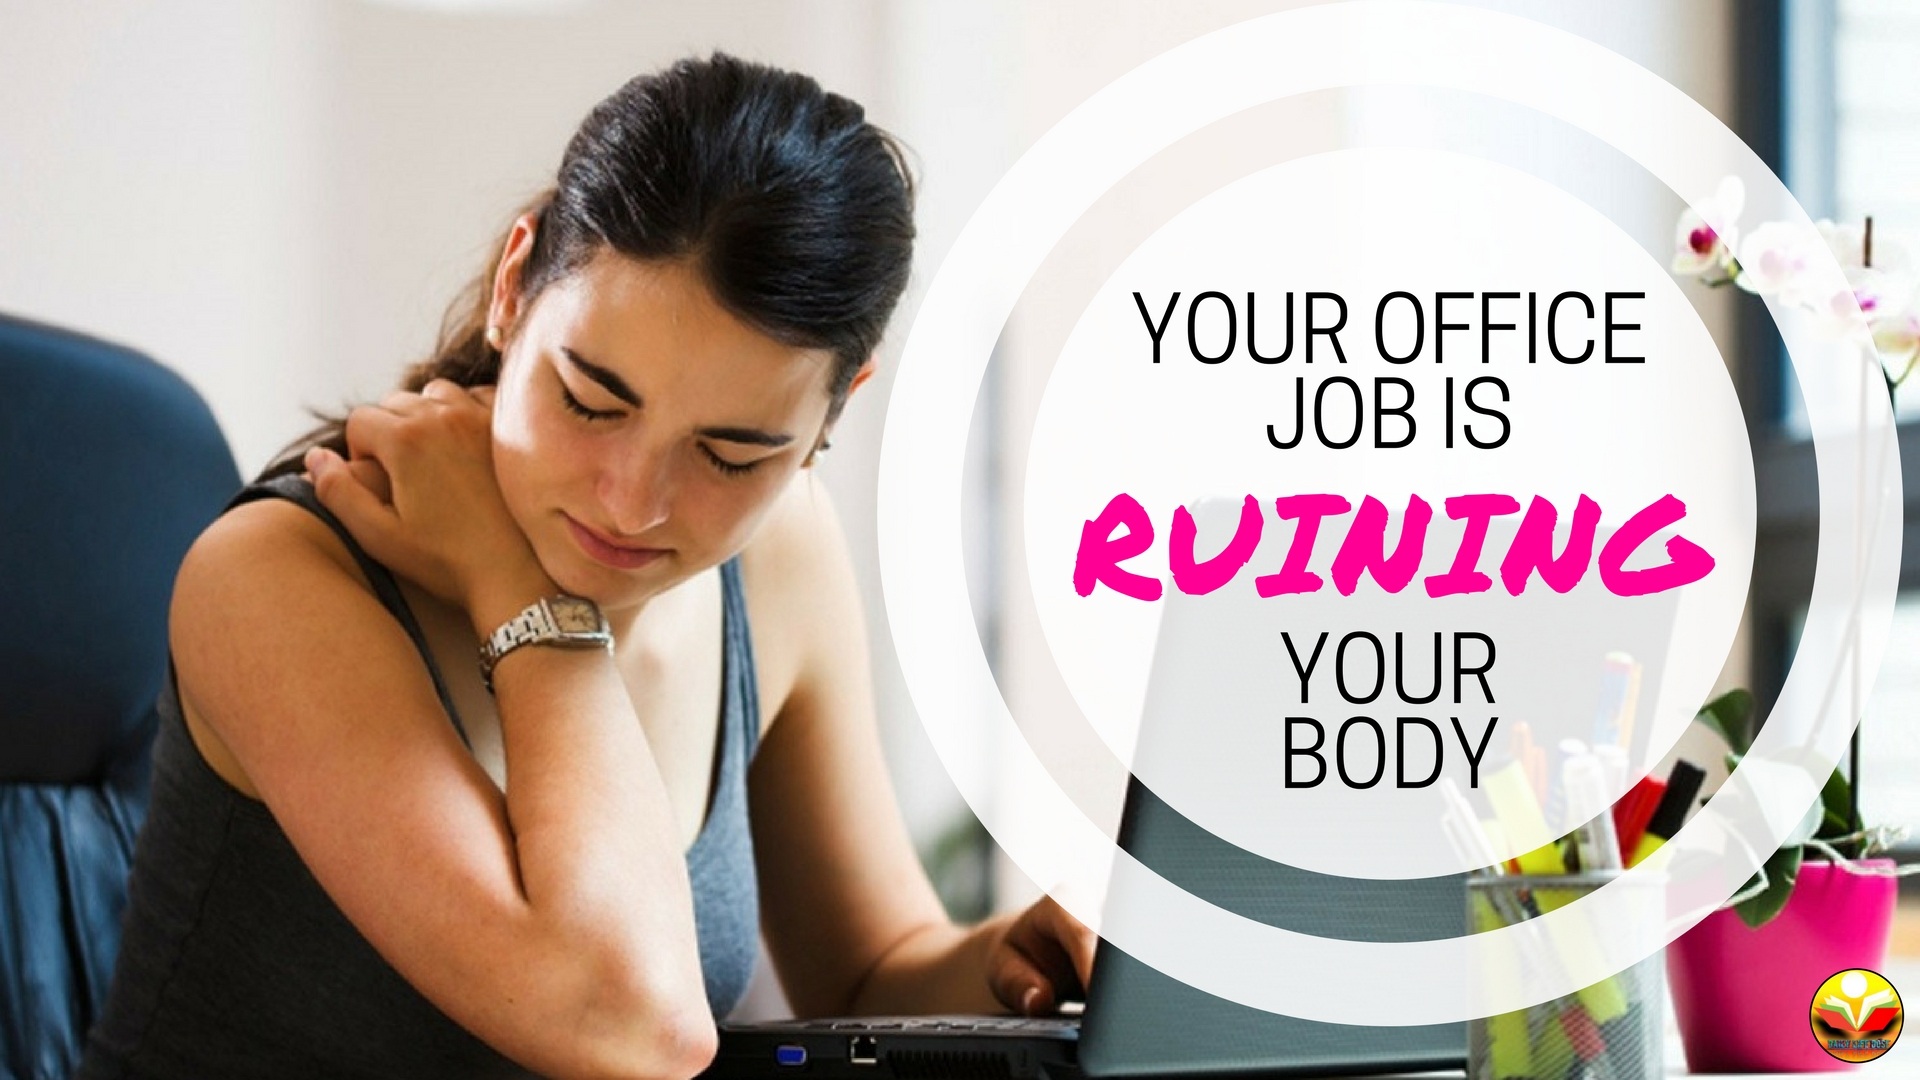 5 Ways Your Office Job is Ruining Your Body - Health Guide